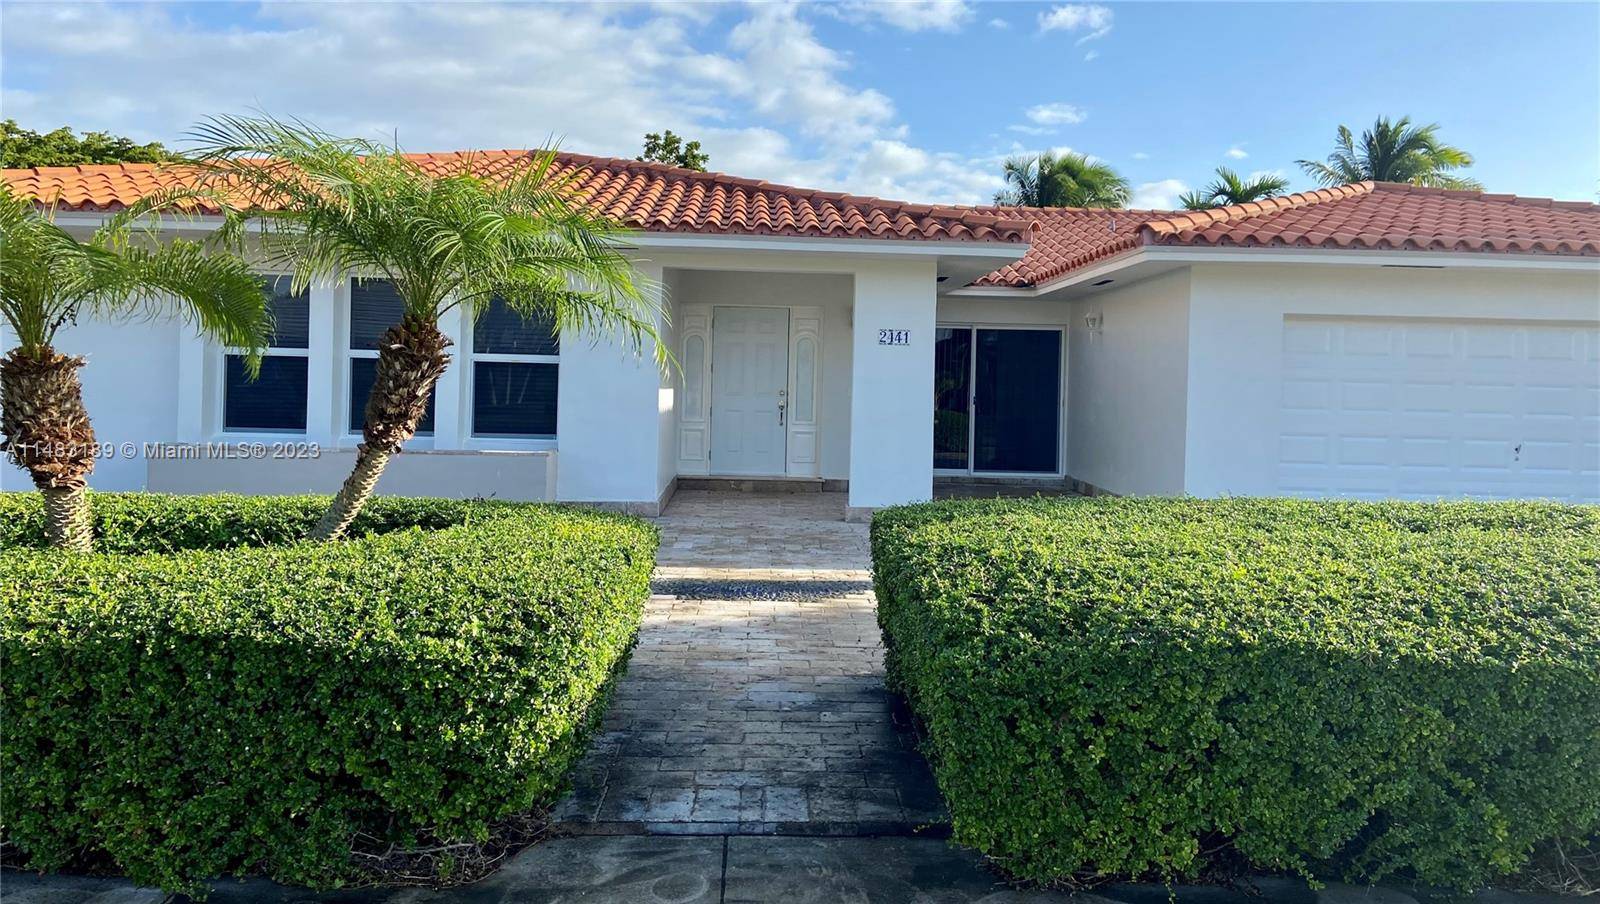 Beautifully, newly renovated single family home for rent in great location on Coral Way.